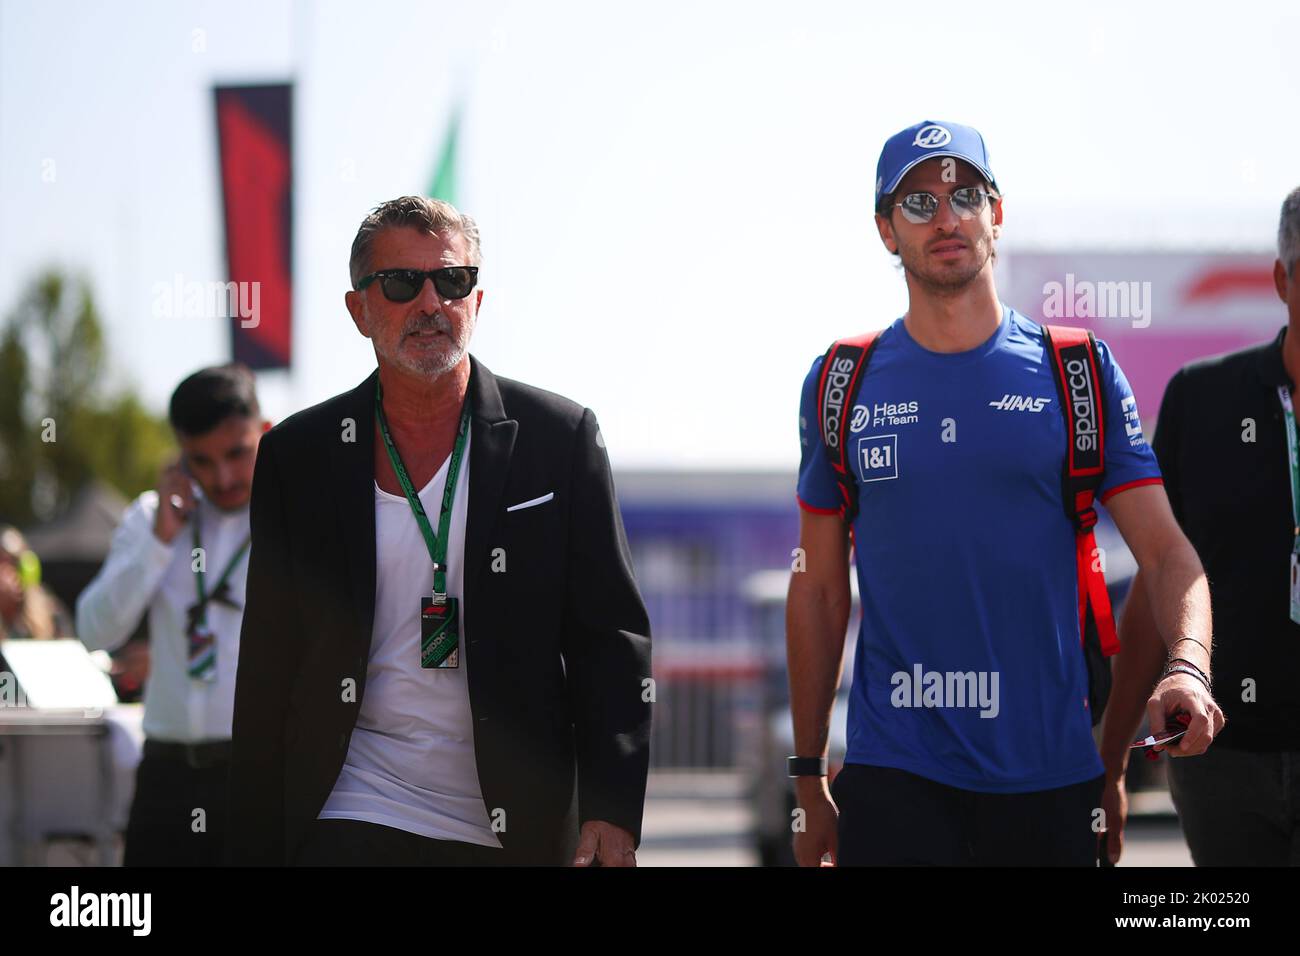 Antonio Giovinazzi with his manager Enrico Zanarini is the Ferrari reserve driver and former f1 driver with Alfa Romeo Sauber, drive for Haas F1 Team during the Italian GP, 8-11 September 2022 at Monza track, Formula 1 World championship 2022. Stock Photo